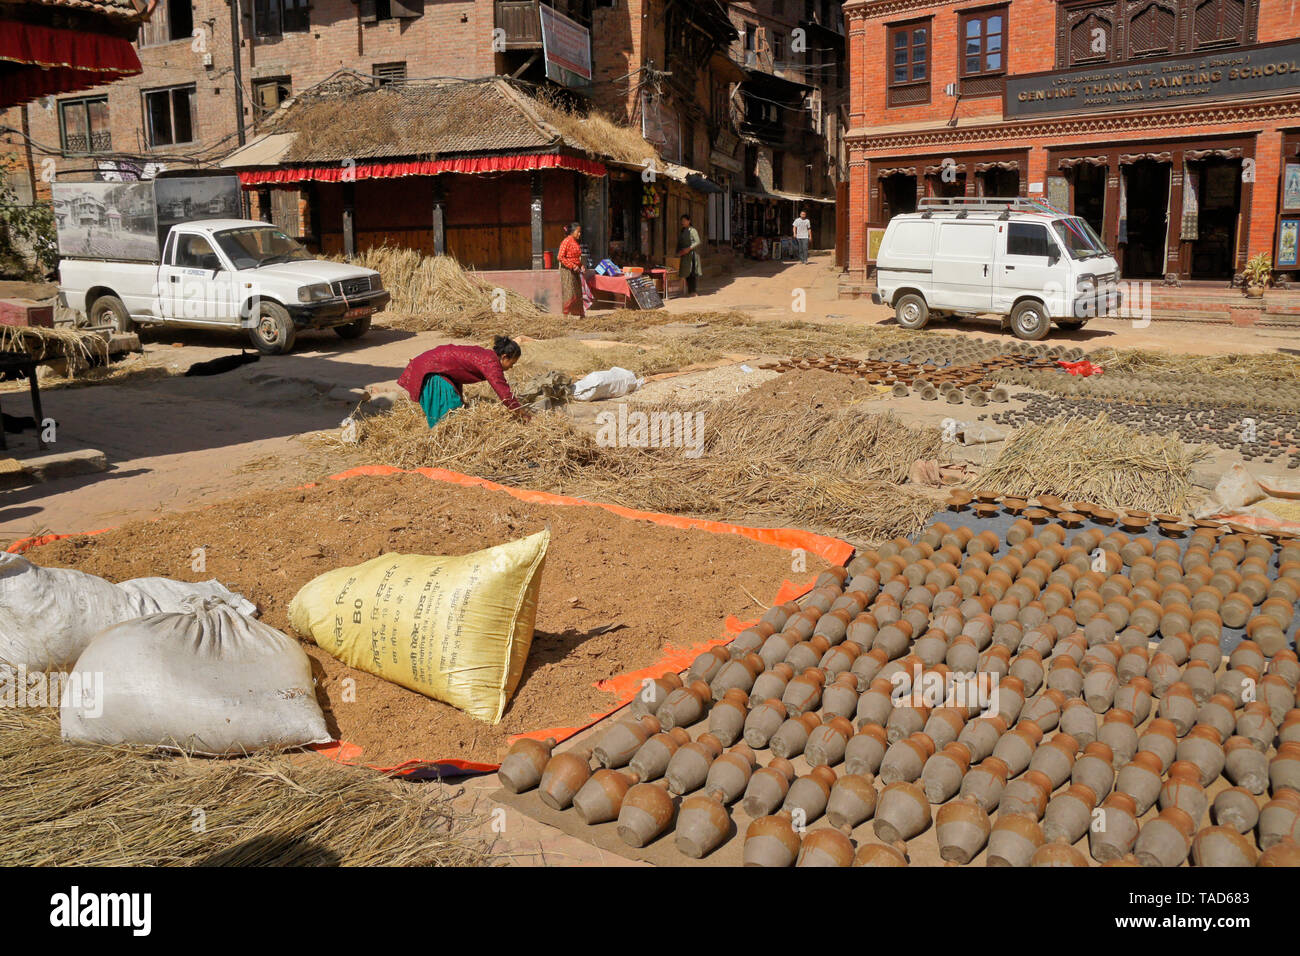 Clay pottery and harvested crops drying in sun in Kumale Tol (Potters' Square, Pottery Square), Bhaktapur, Kathmandu Valley, Nepal Stock Photo